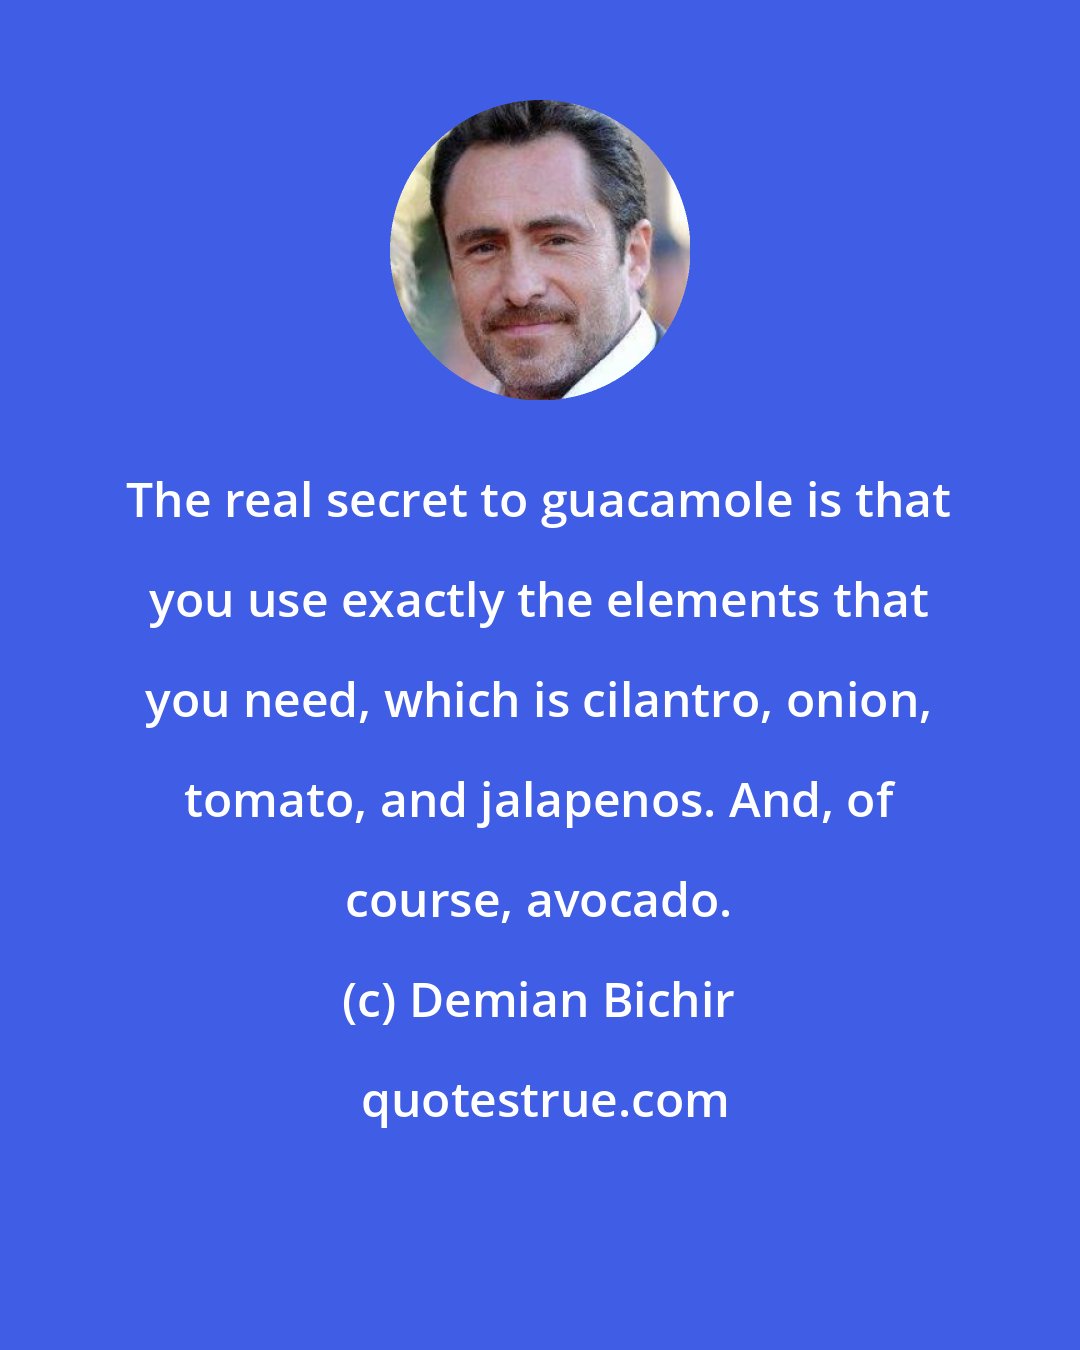 Demian Bichir: The real secret to guacamole is that you use exactly the elements that you need, which is cilantro, onion, tomato, and jalapenos. And, of course, avocado.